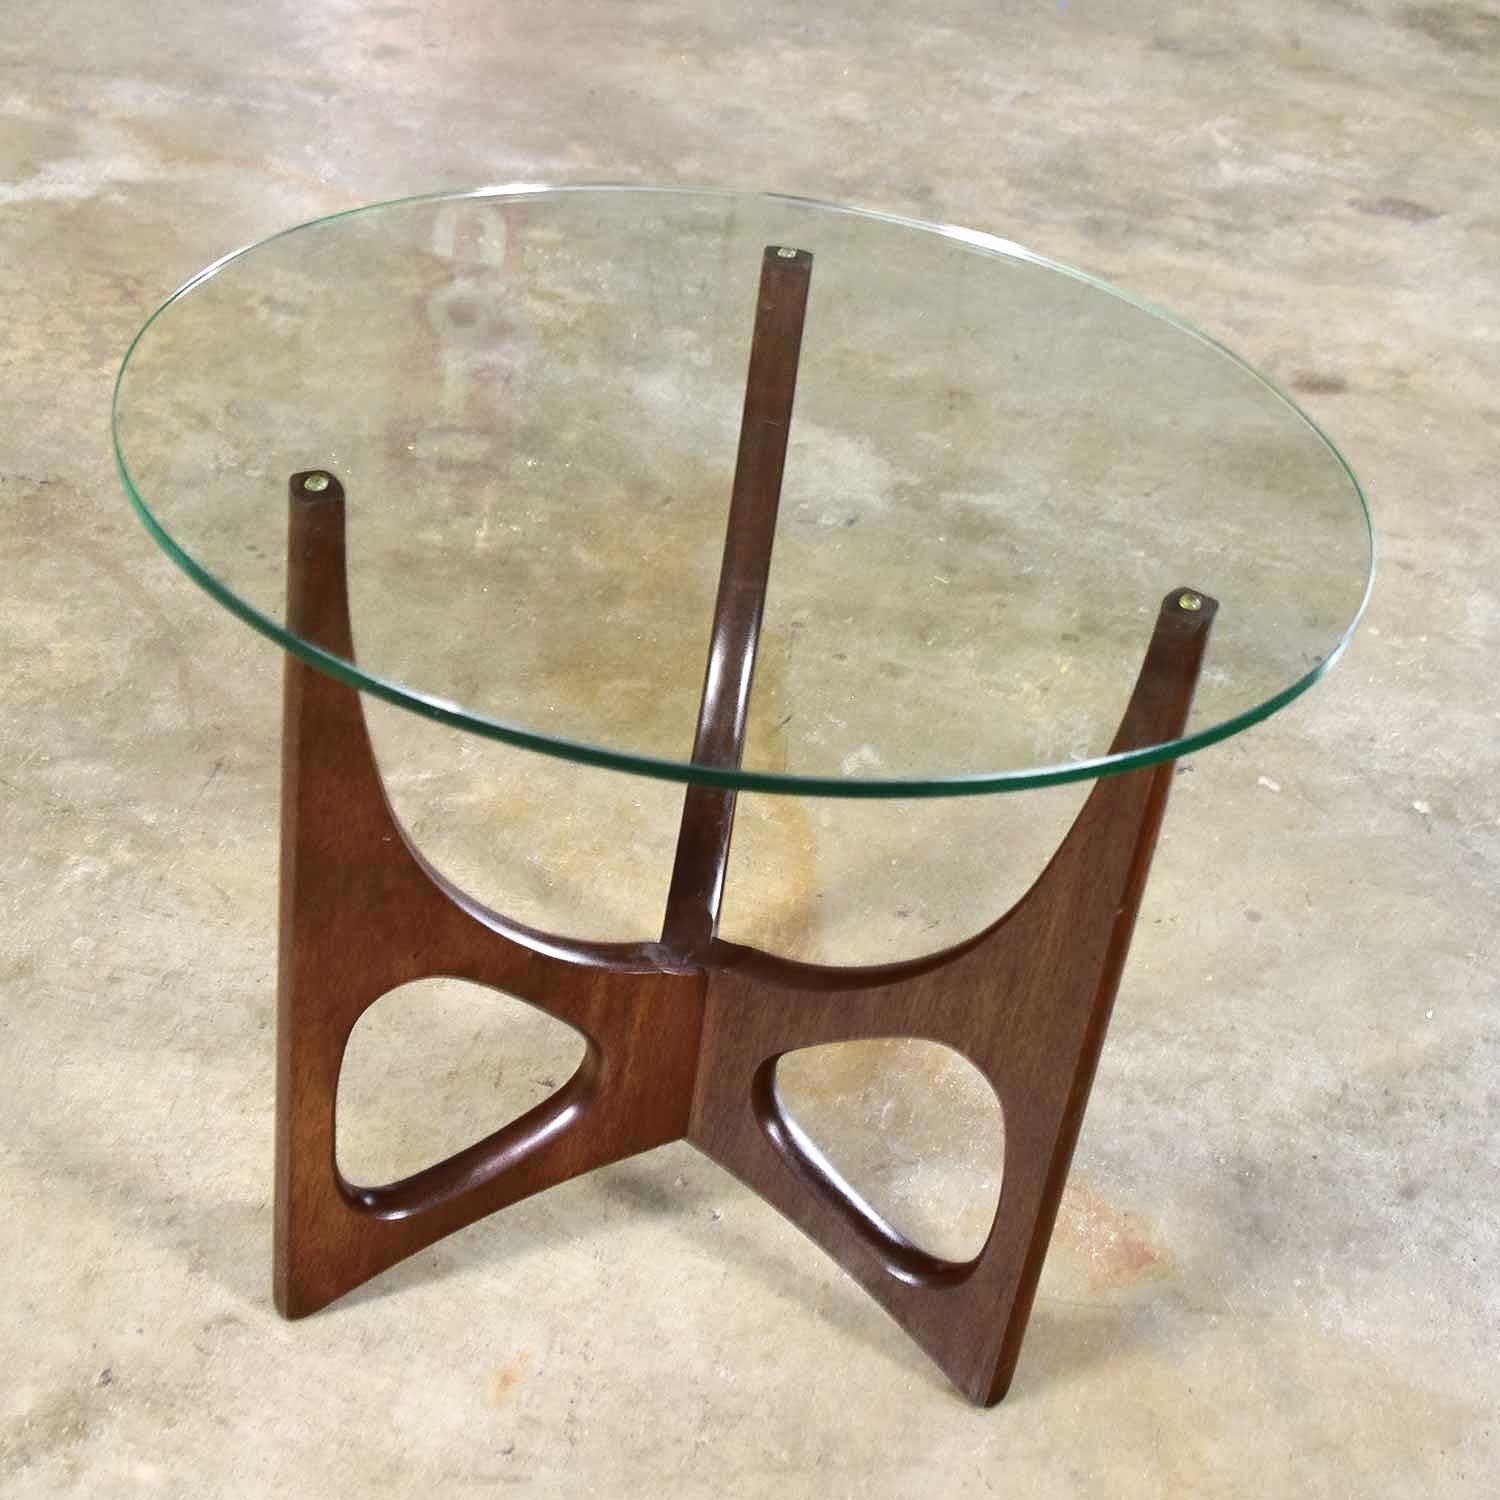 Handsome Mid-Century Modern walnut biomorphic tri-leg side table with round glass top in the style of Adrian Pearsall. Beautiful vintage condition. Age-appropriate wear with no outstanding flaws that we have detected. Please see photos, circa